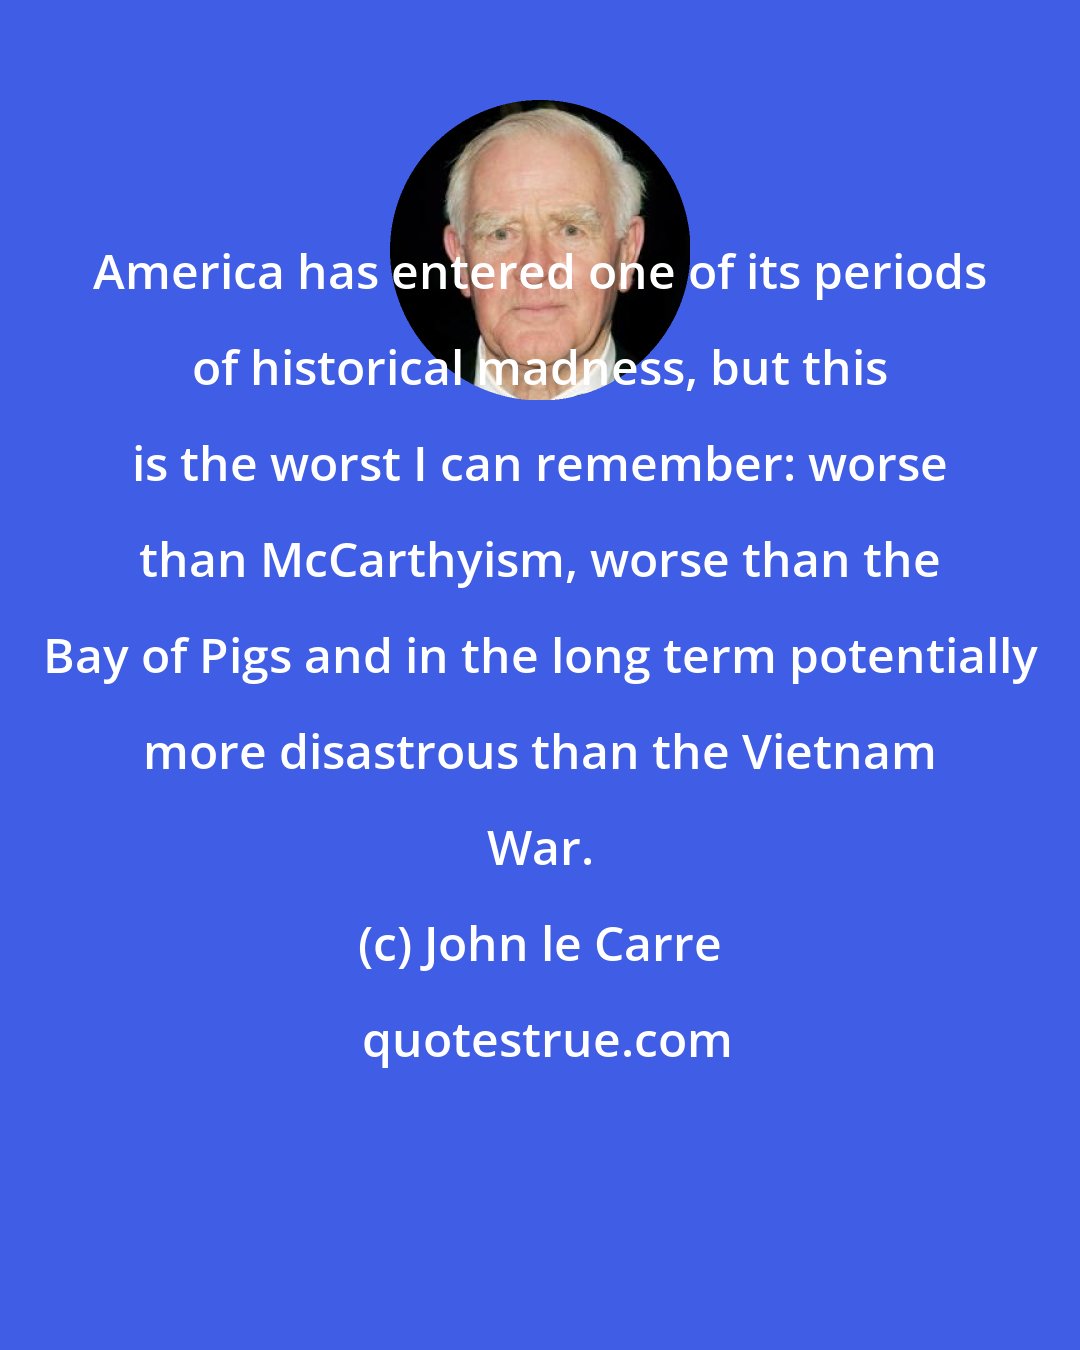 John le Carre: America has entered one of its periods of historical madness, but this is the worst I can remember: worse than McCarthyism, worse than the Bay of Pigs and in the long term potentially more disastrous than the Vietnam War.